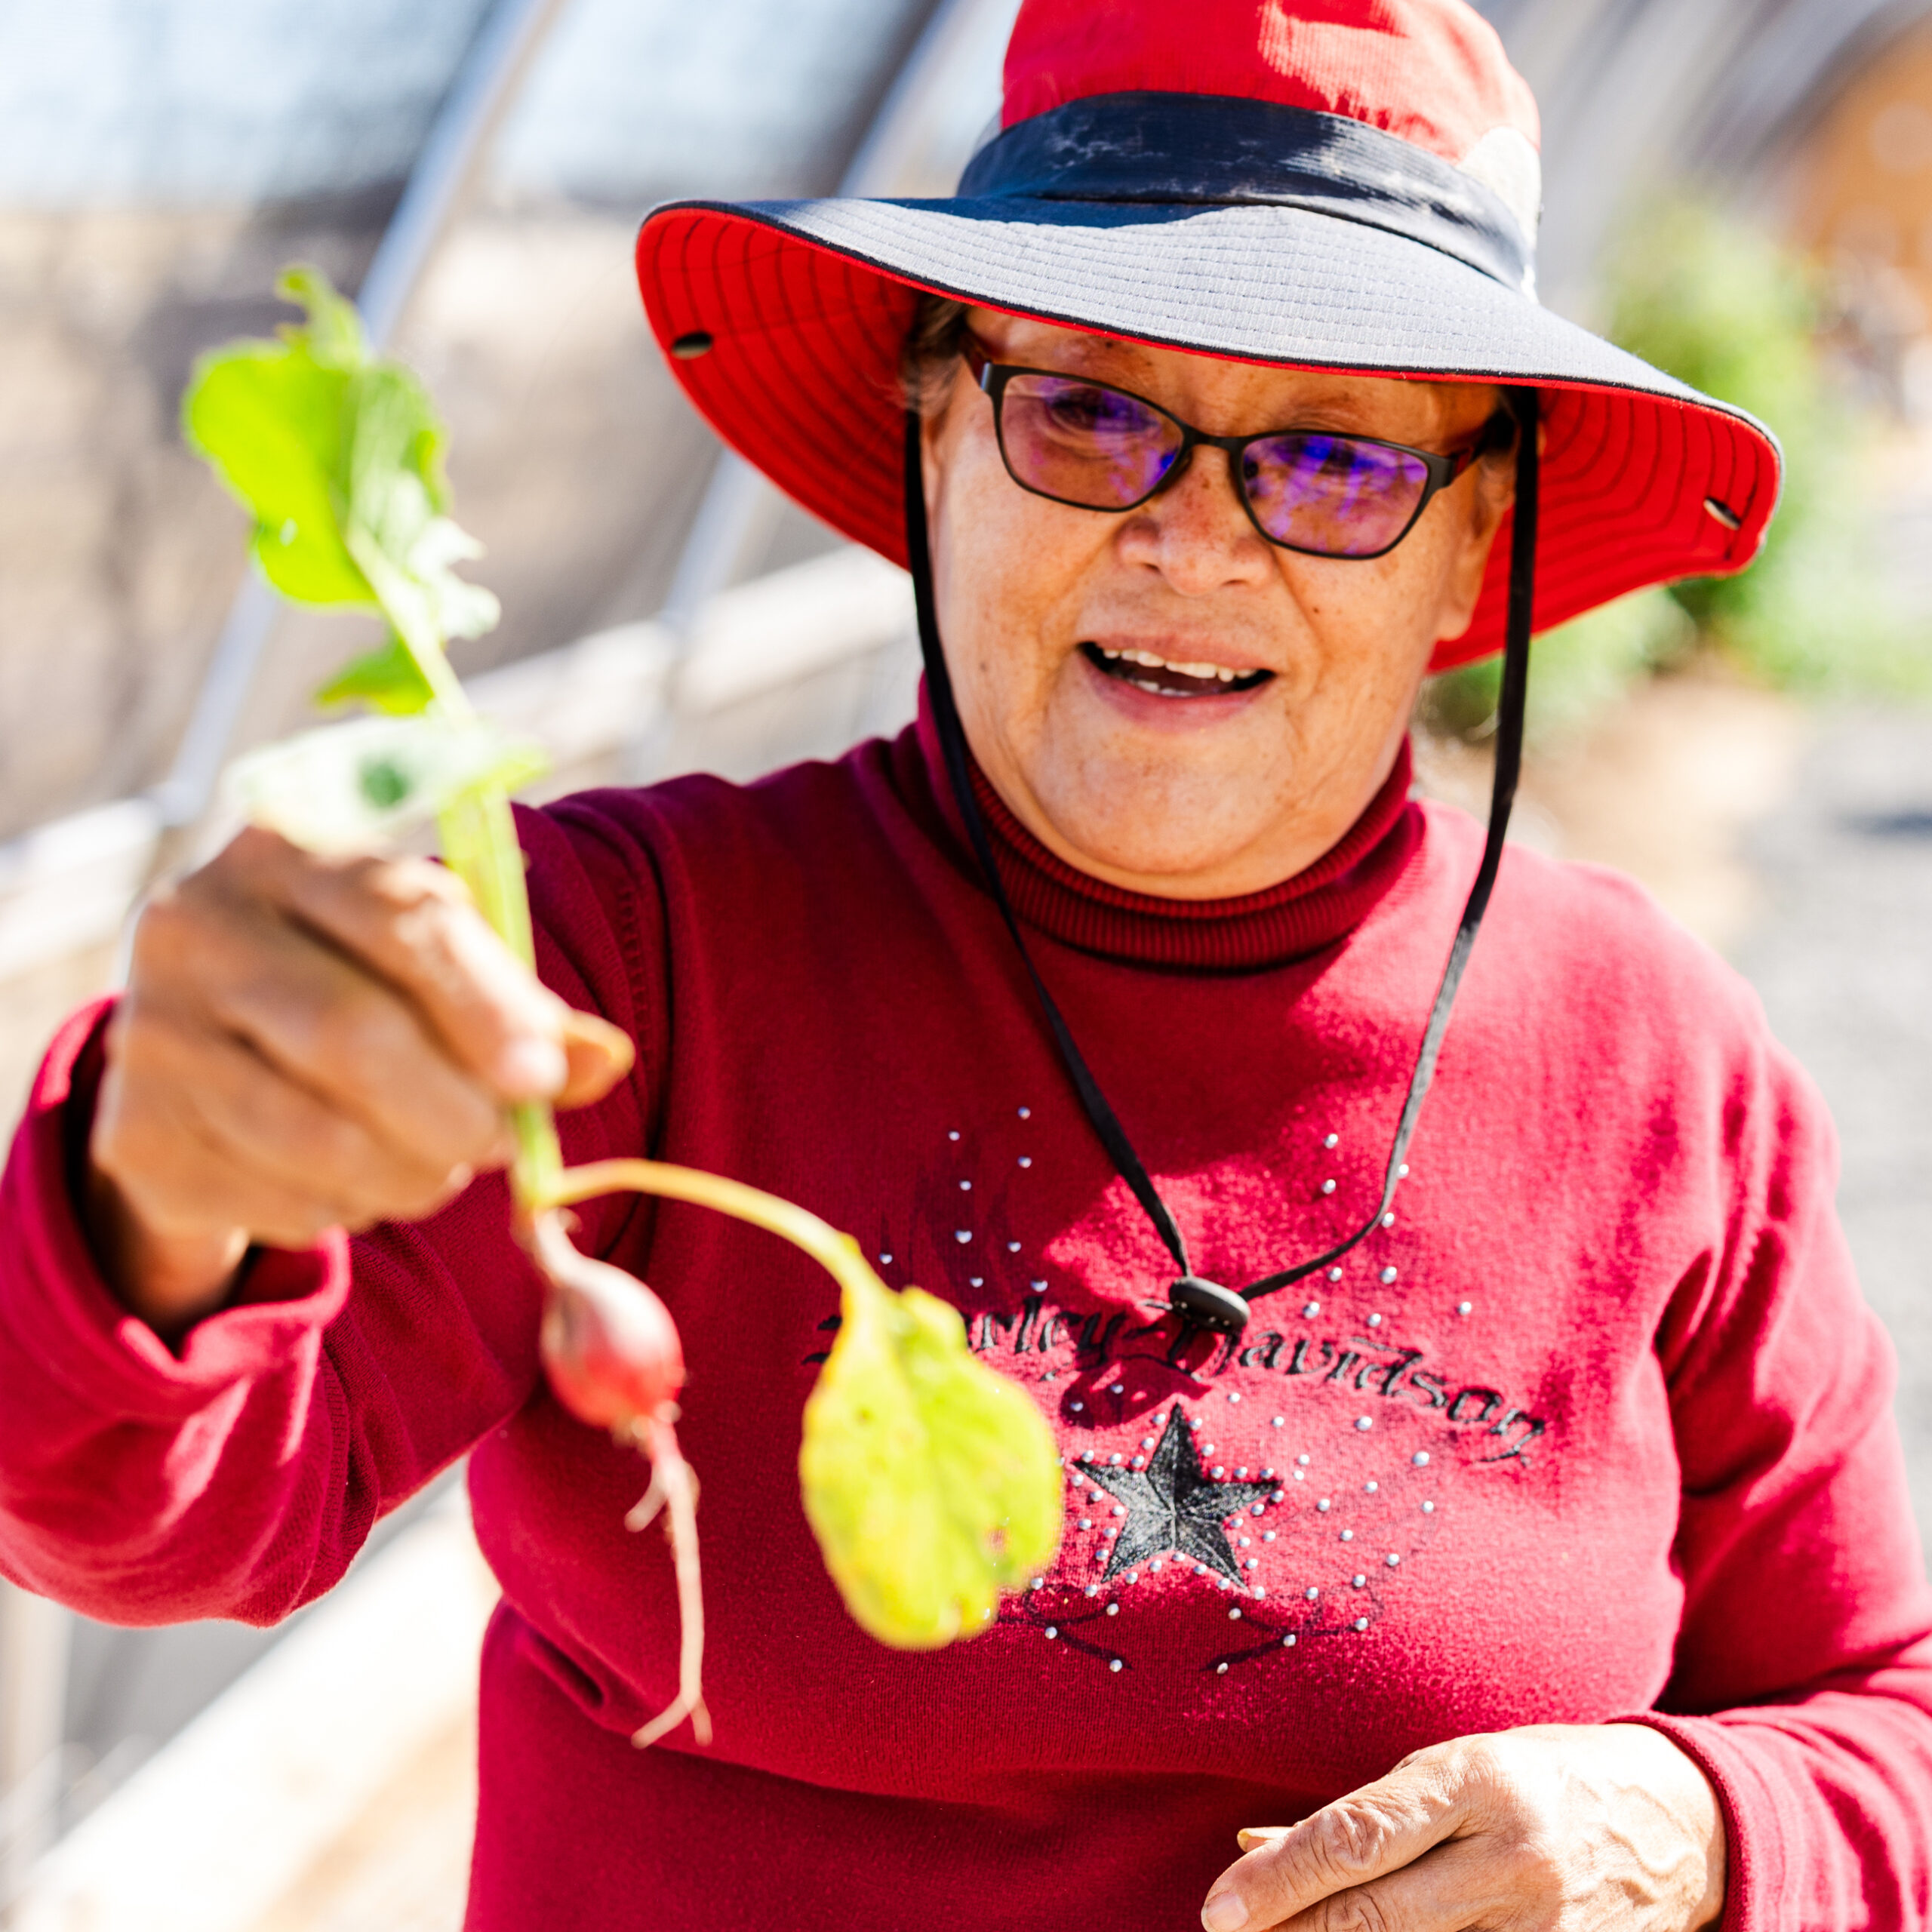 In the Navajo Nation, greenhouses have begun to dot the landscape to combat decades of food insecurity.